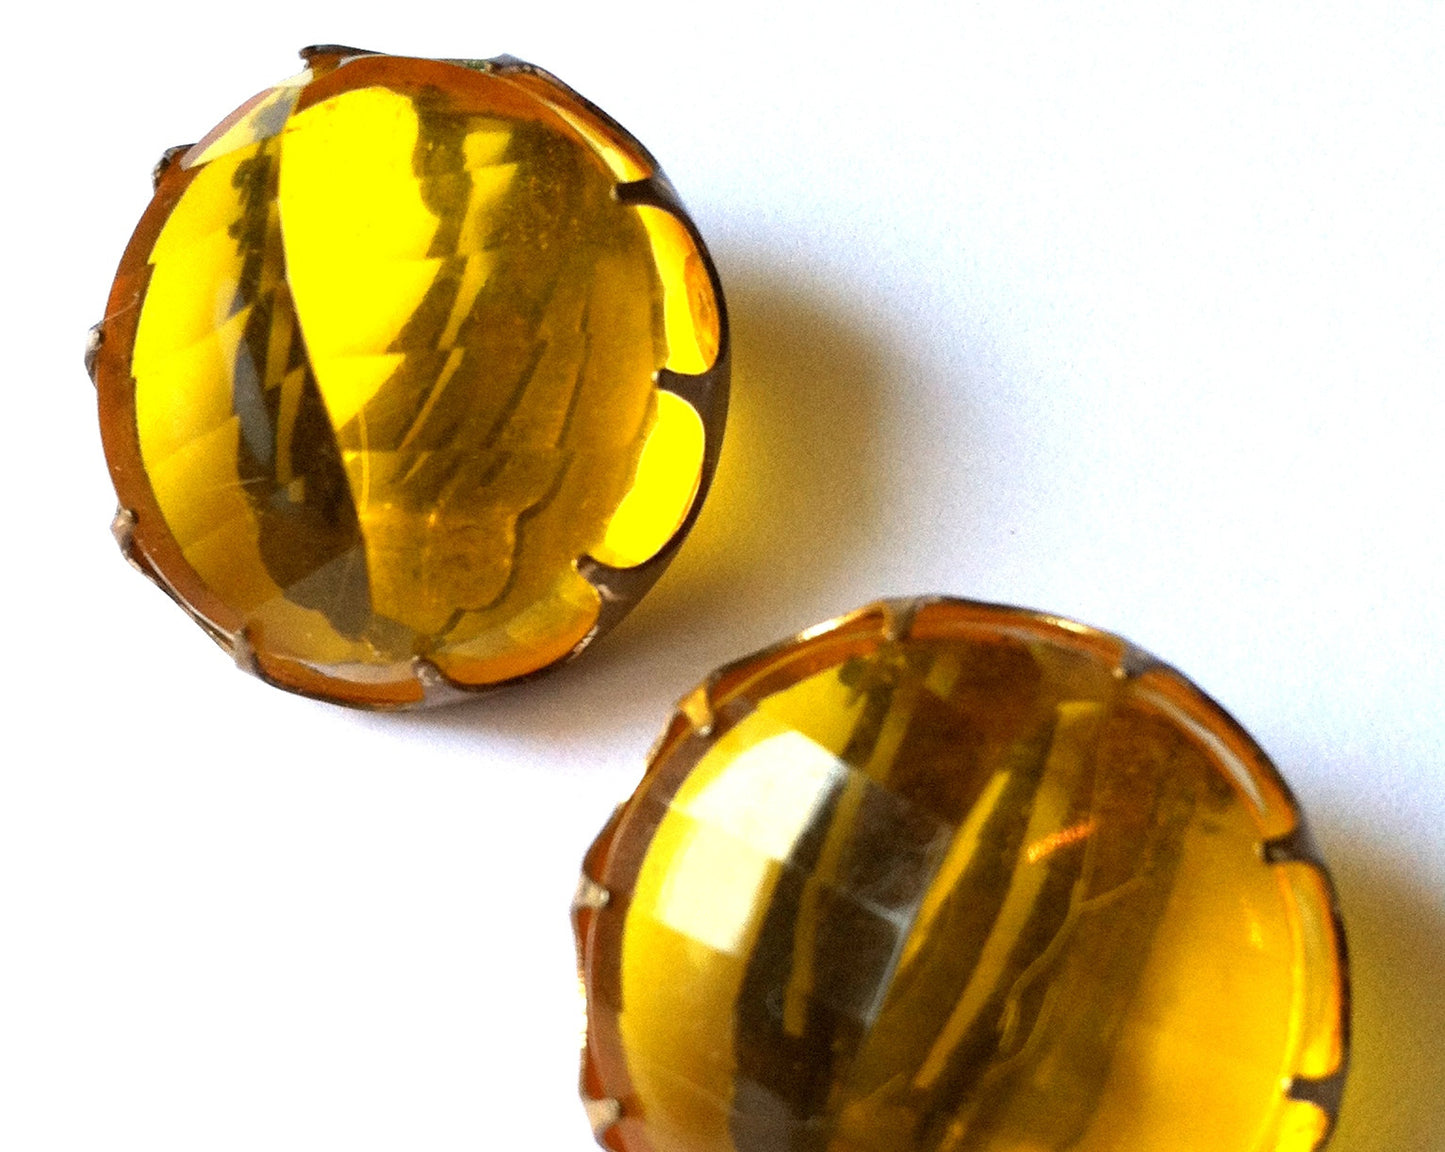 Amber Beveled Lucite Peaked Dome Large Clip Earrings circa 1950s